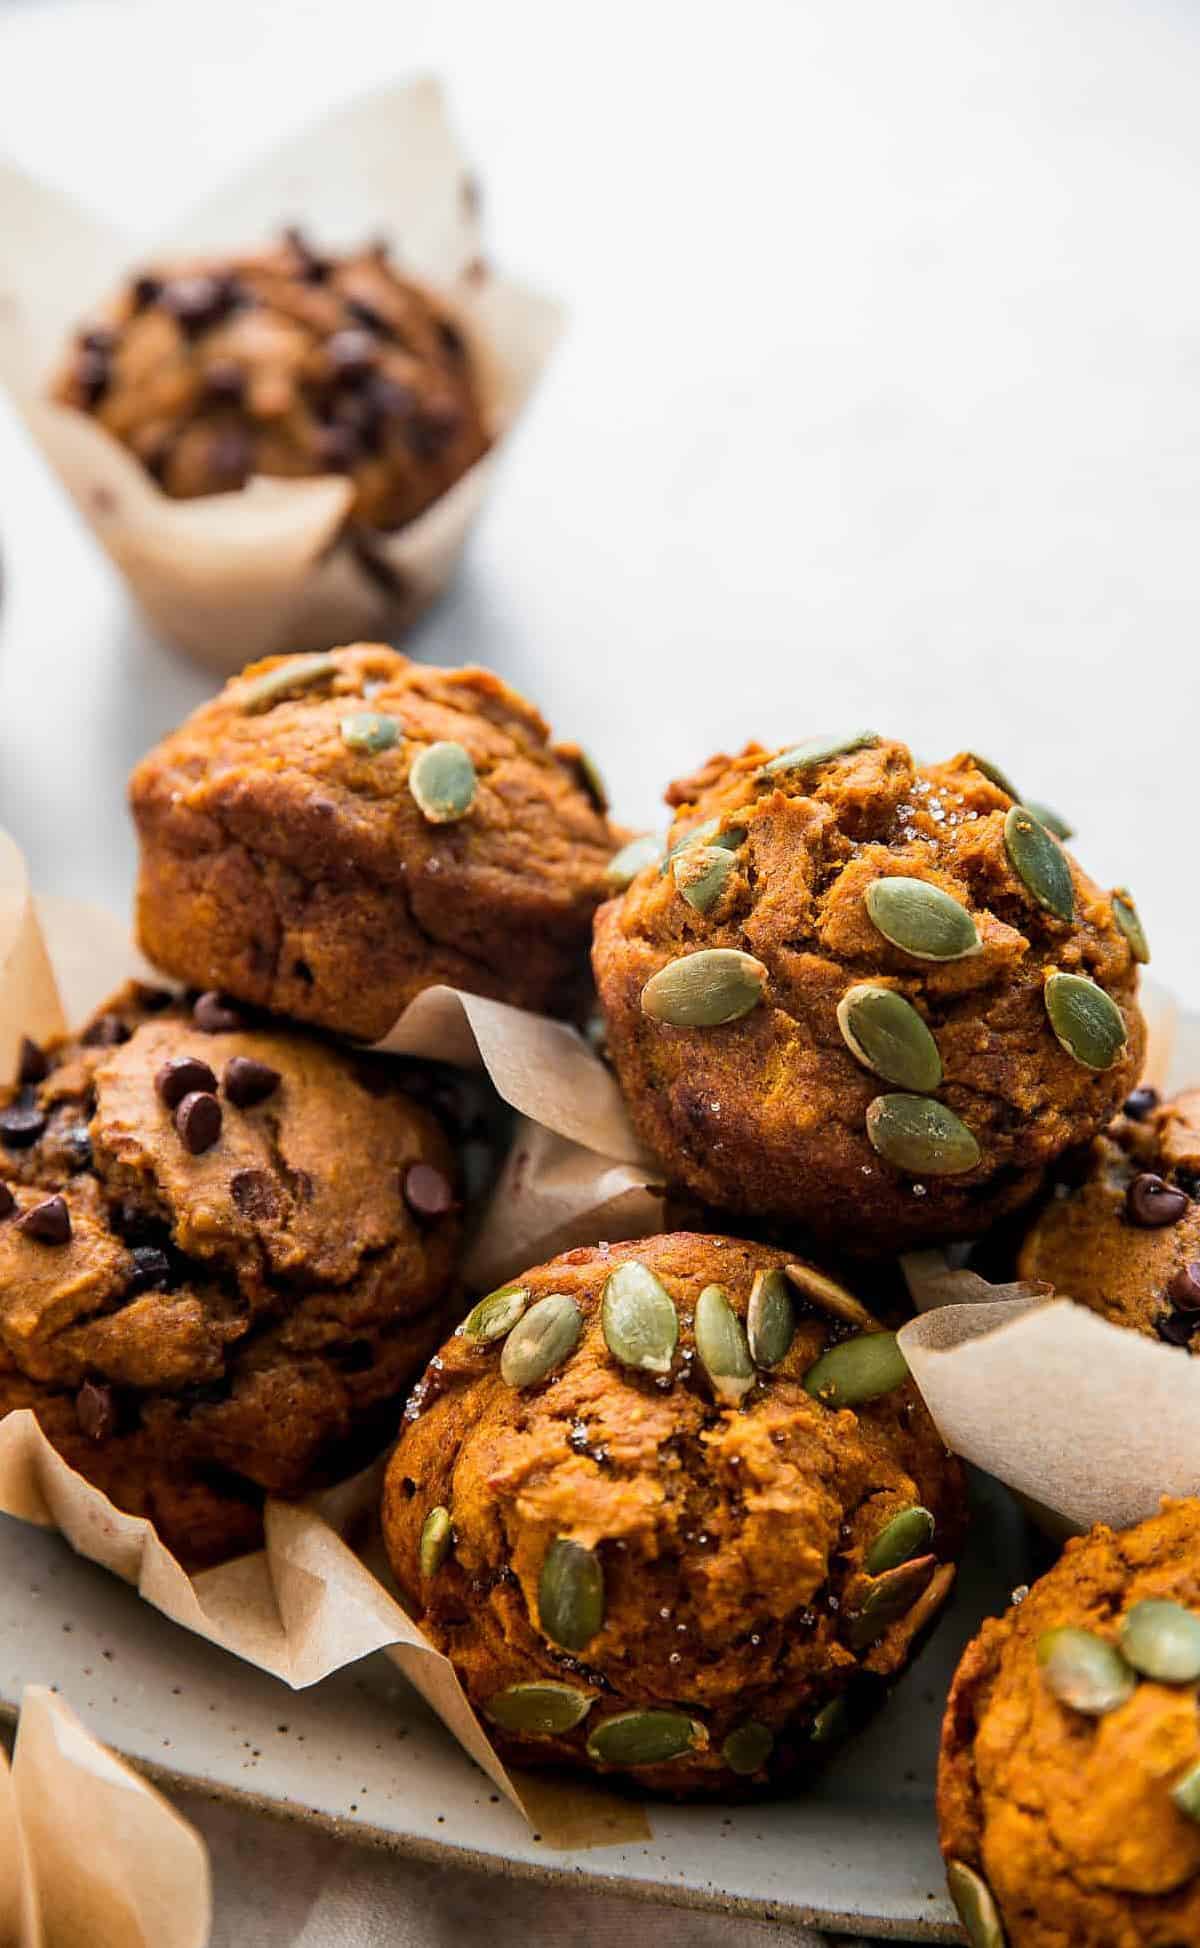  Who says muffins can't be healthy? These muffins are made with whole wheat flour and flaxseed meal.